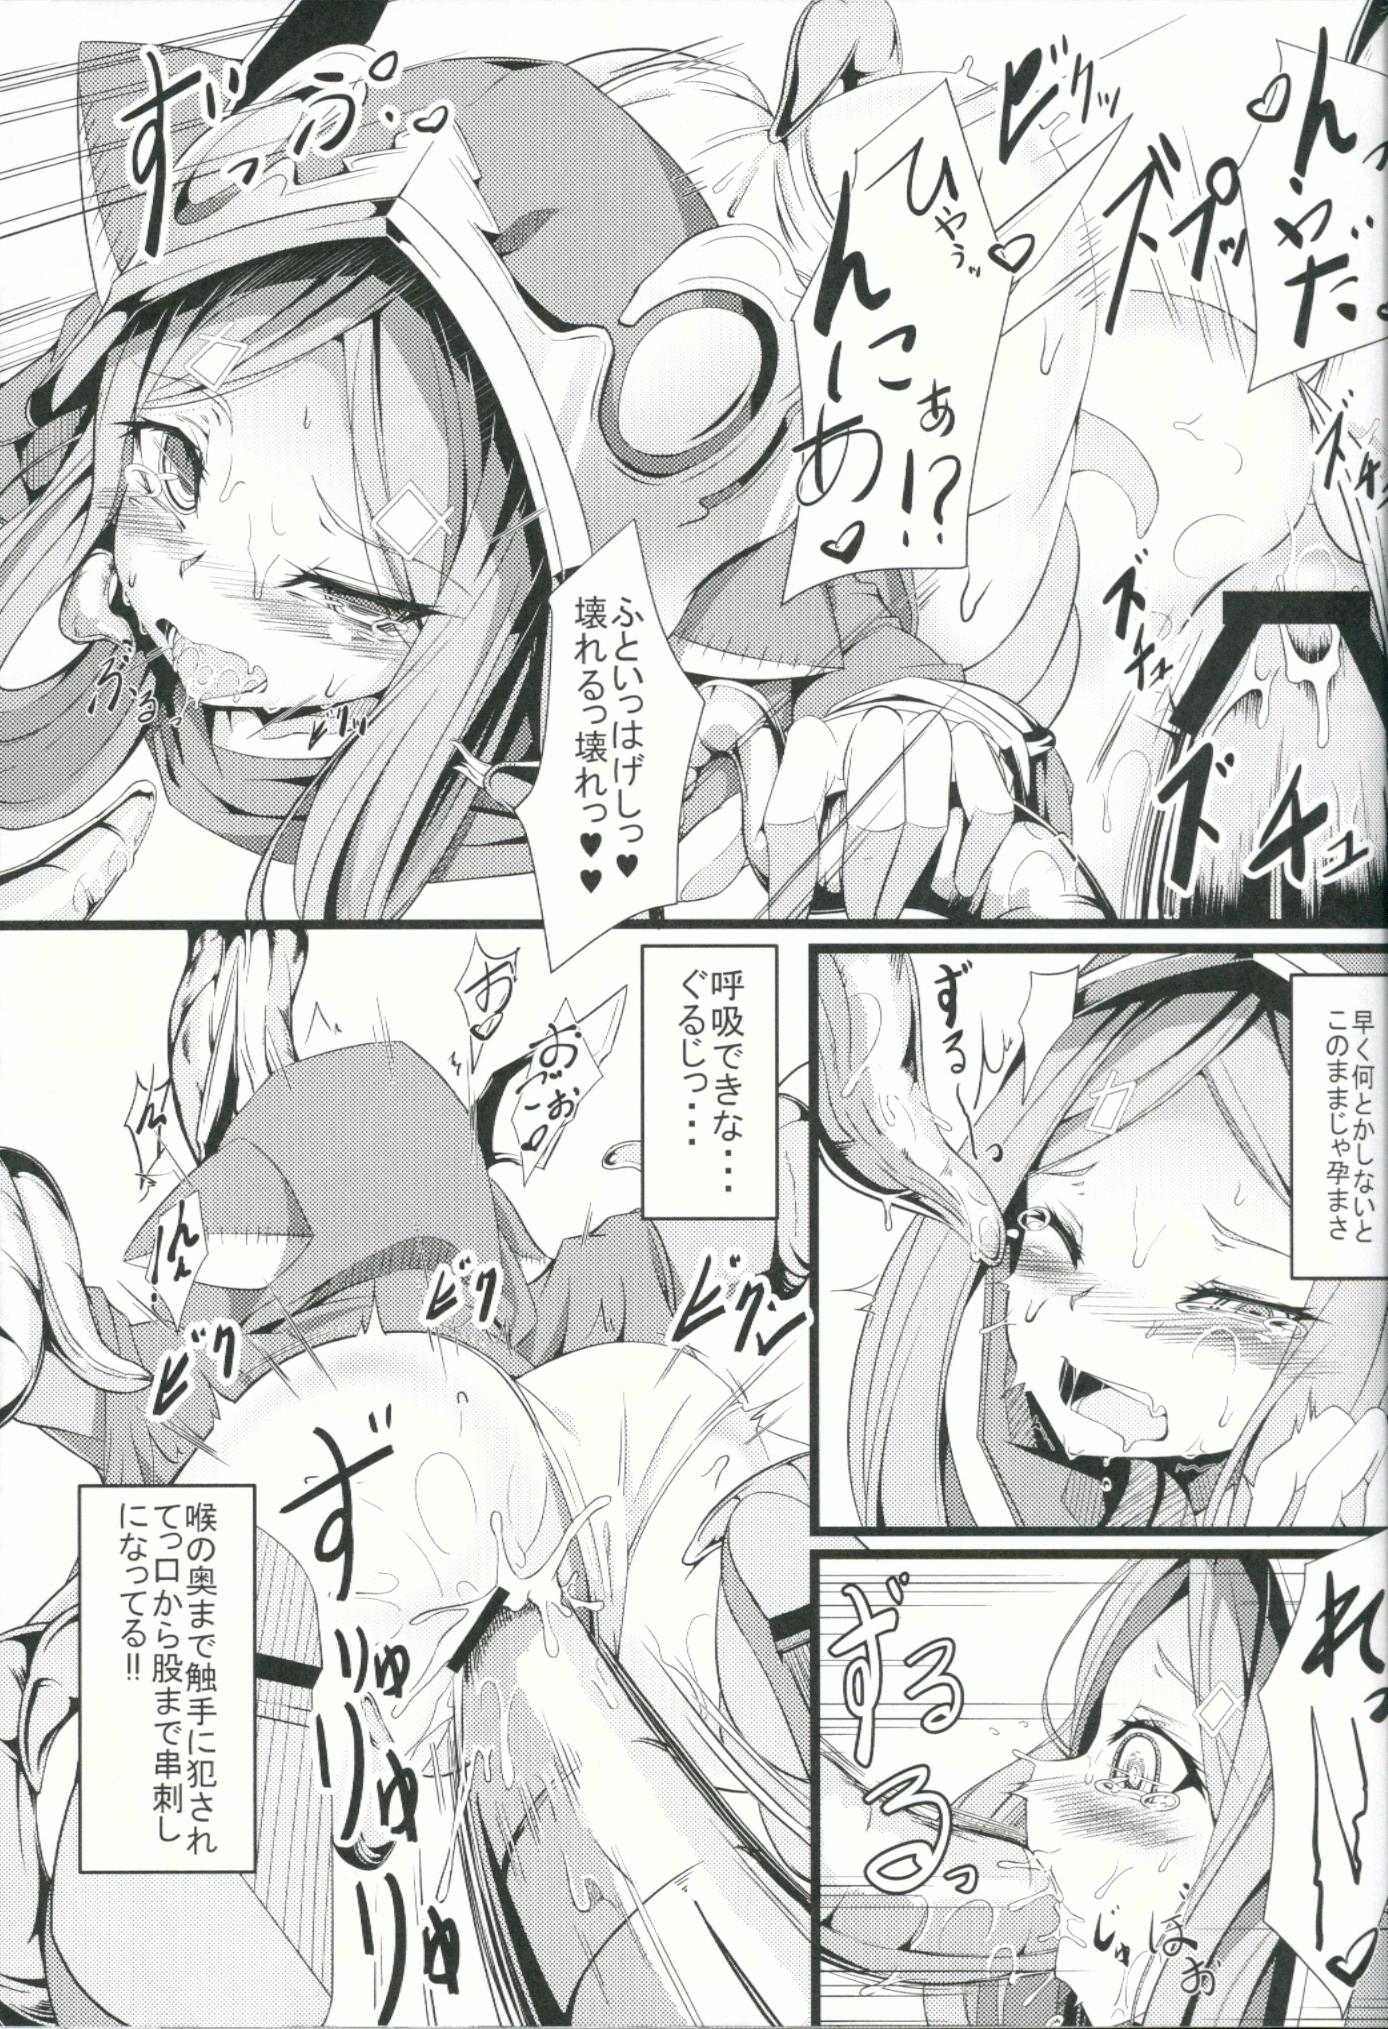 Sex Pussy M.P. Vol. 6 - Granblue fantasy Cosplay - Page 8